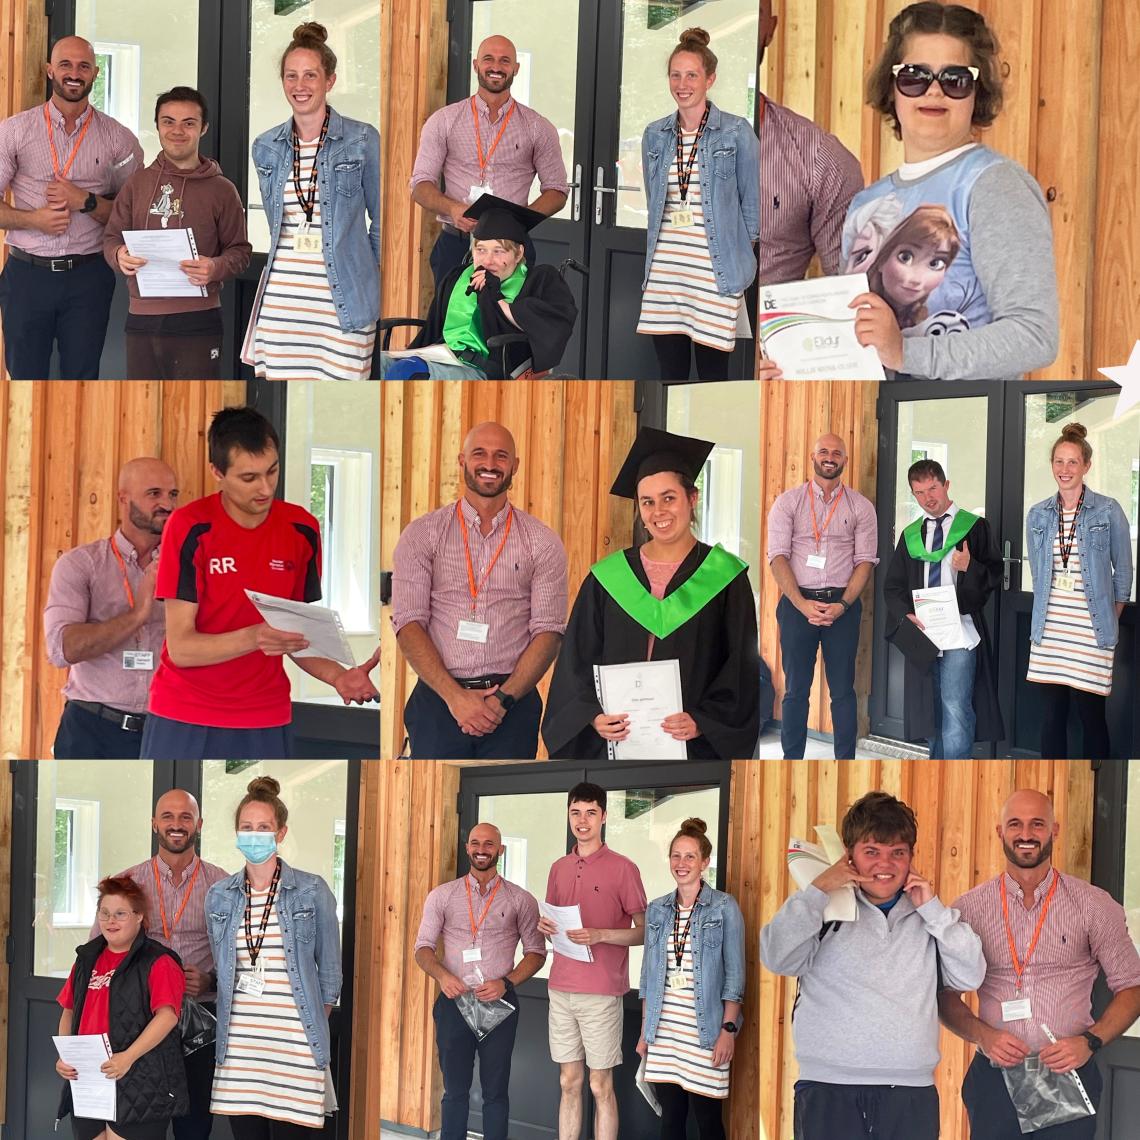 9 images of learners being presented with DofE Awards at Elidyr Communities Trust.